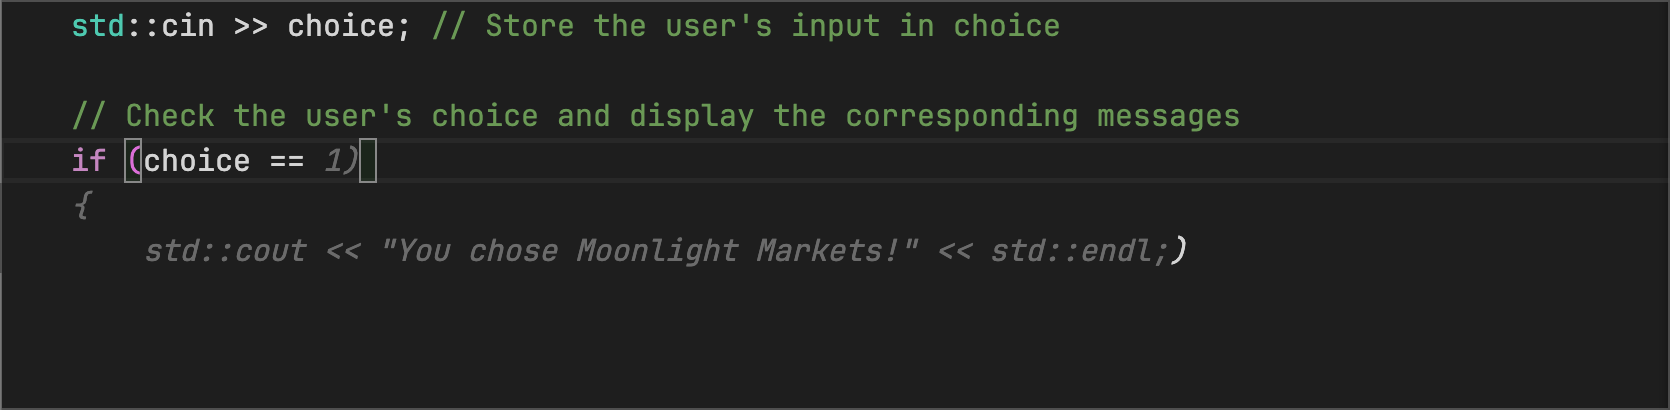 adventure.cpp - Code Suggestions suggests using an if statement to manage choice of locations